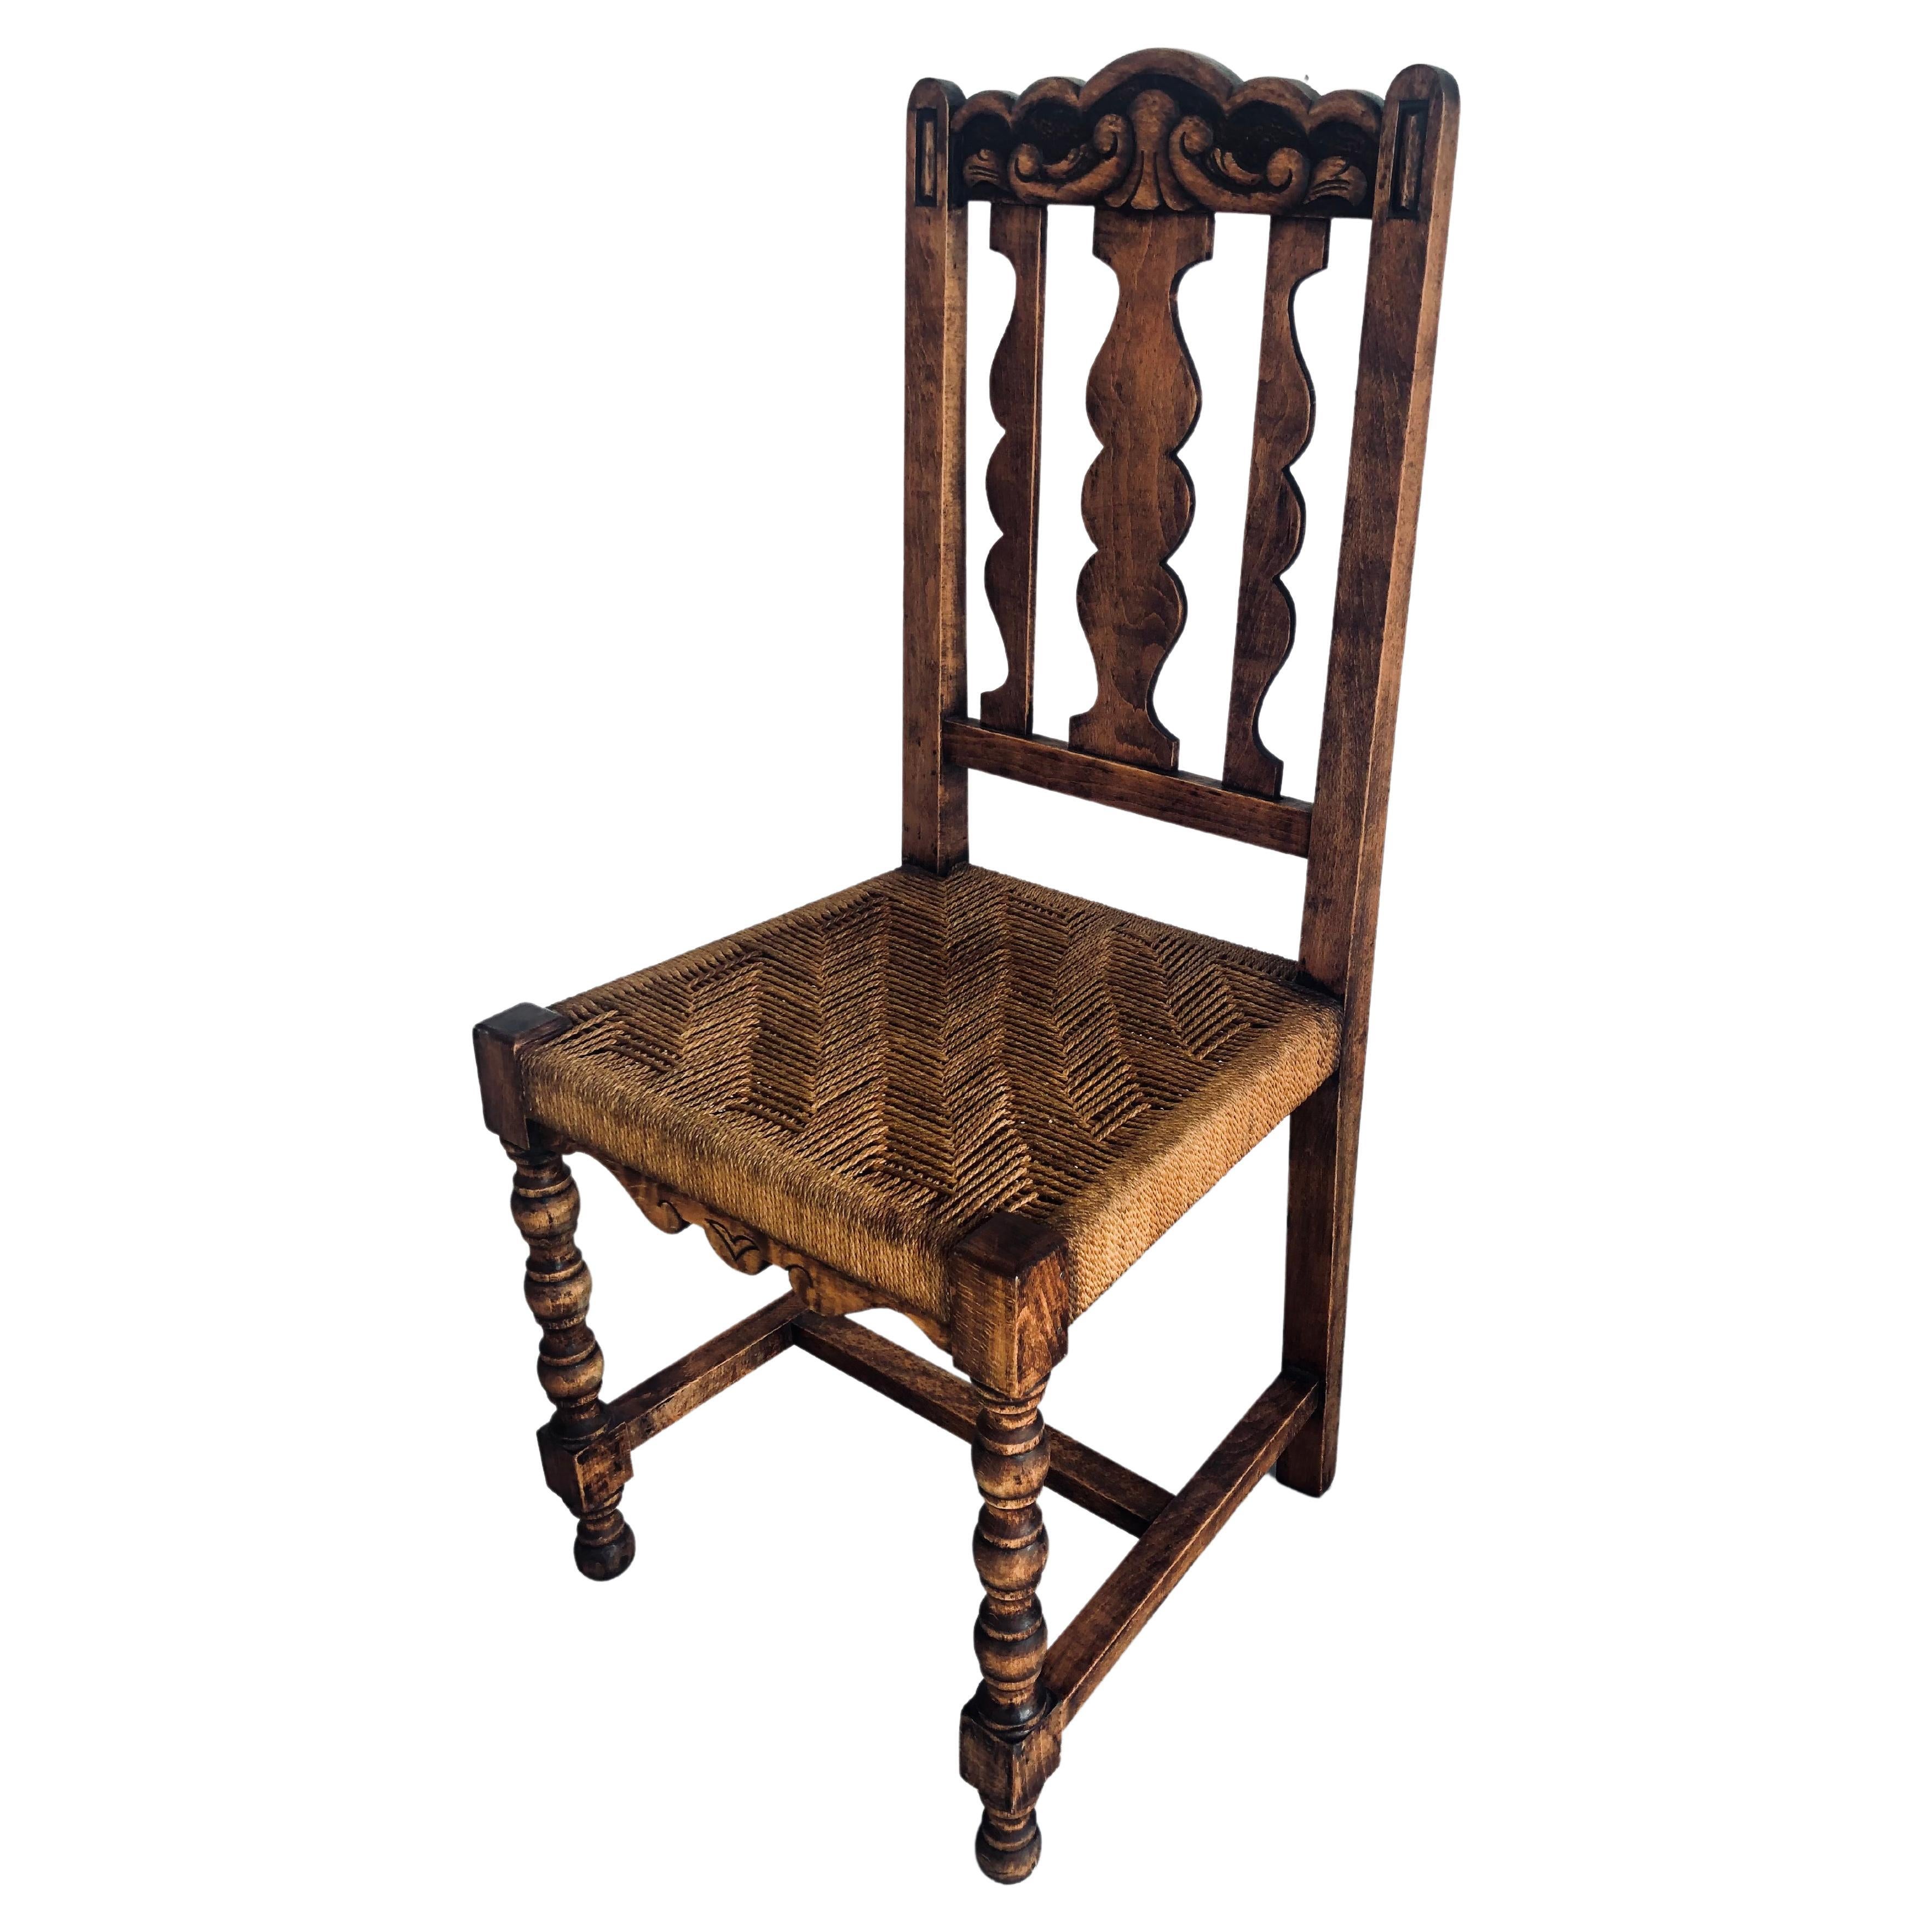 Vintage Solid Wood and Rope Seat Chair, Spanish Wooden Castilian Style Chair For Sale